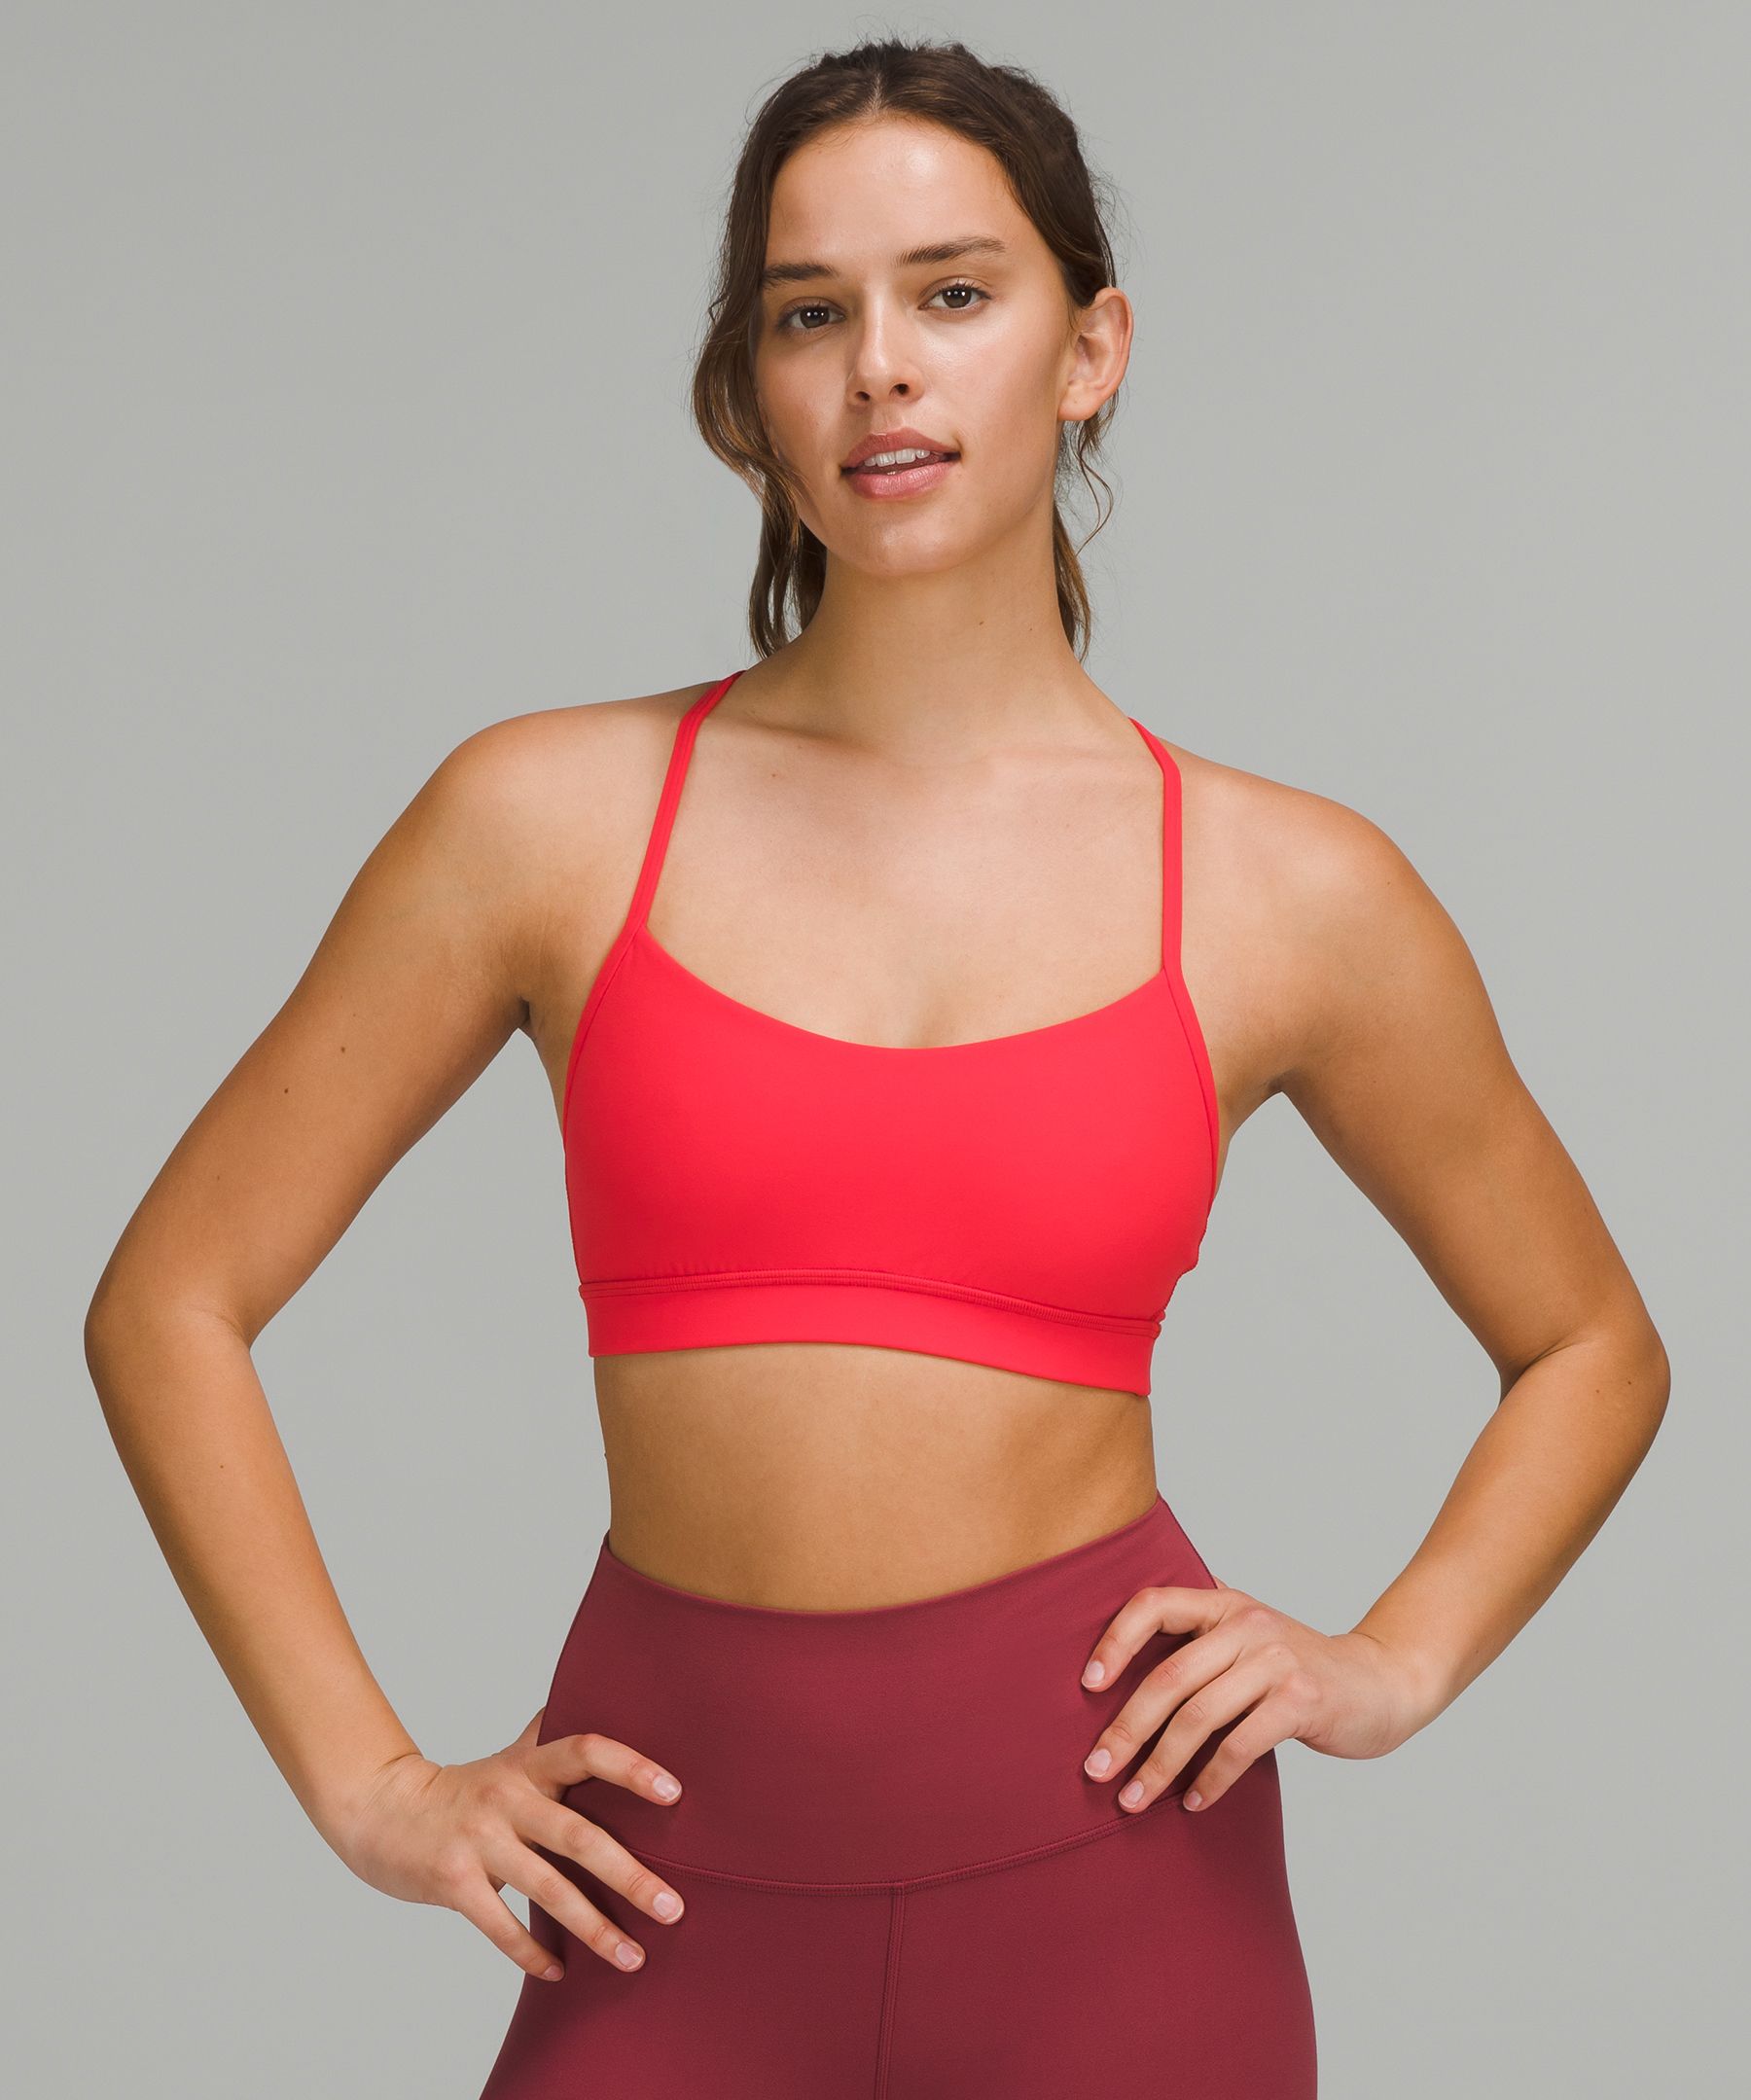 Love the Flow Y Bra - Nulu, but the colour seems to be fading out